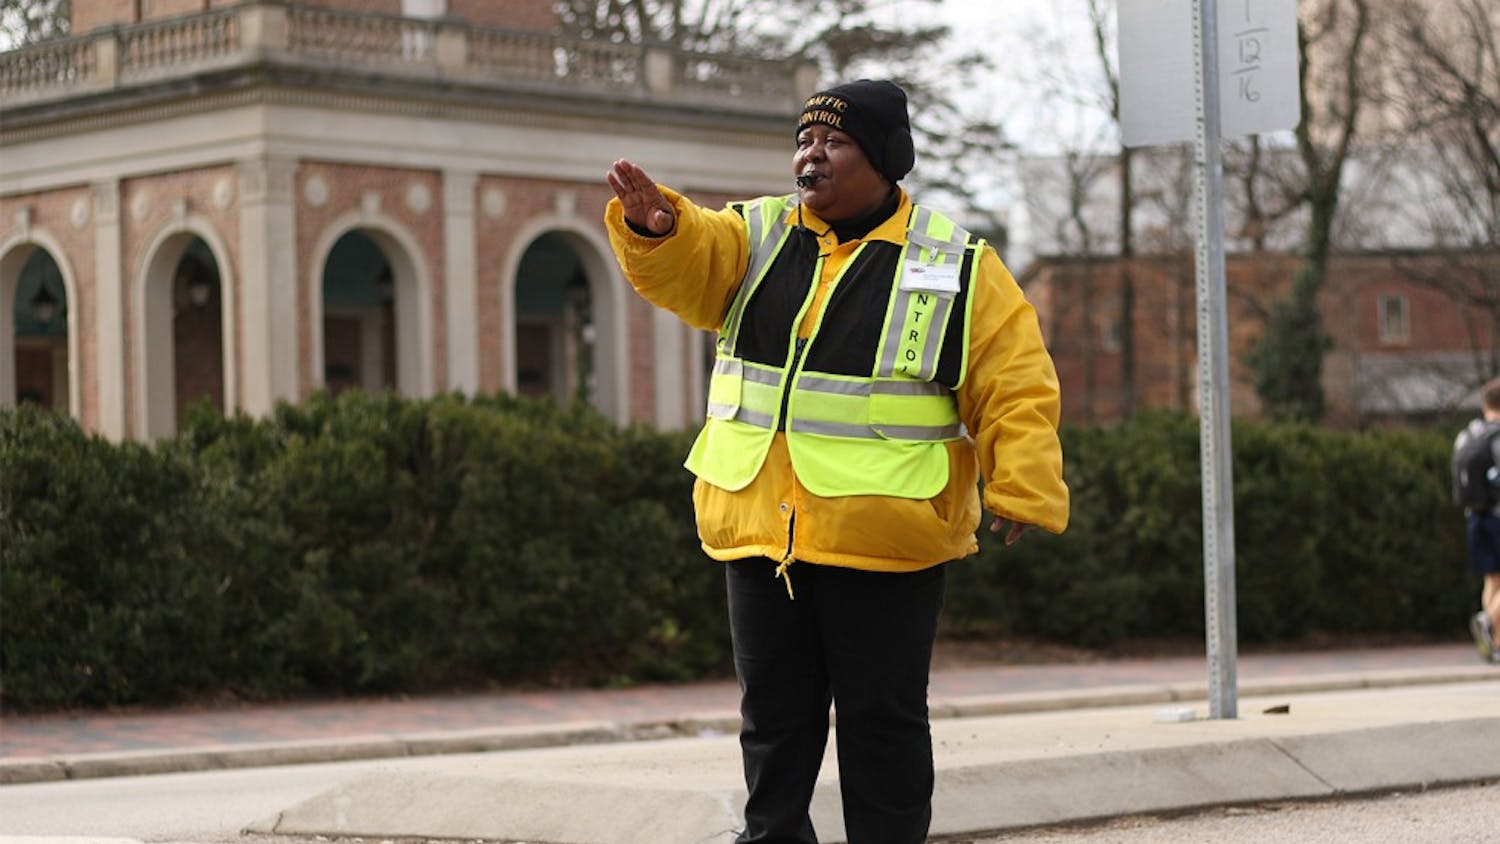 Joann Isom direct pedestrian and vehicle traffic every morning in front of the bell tower to help students get safely to and from class.